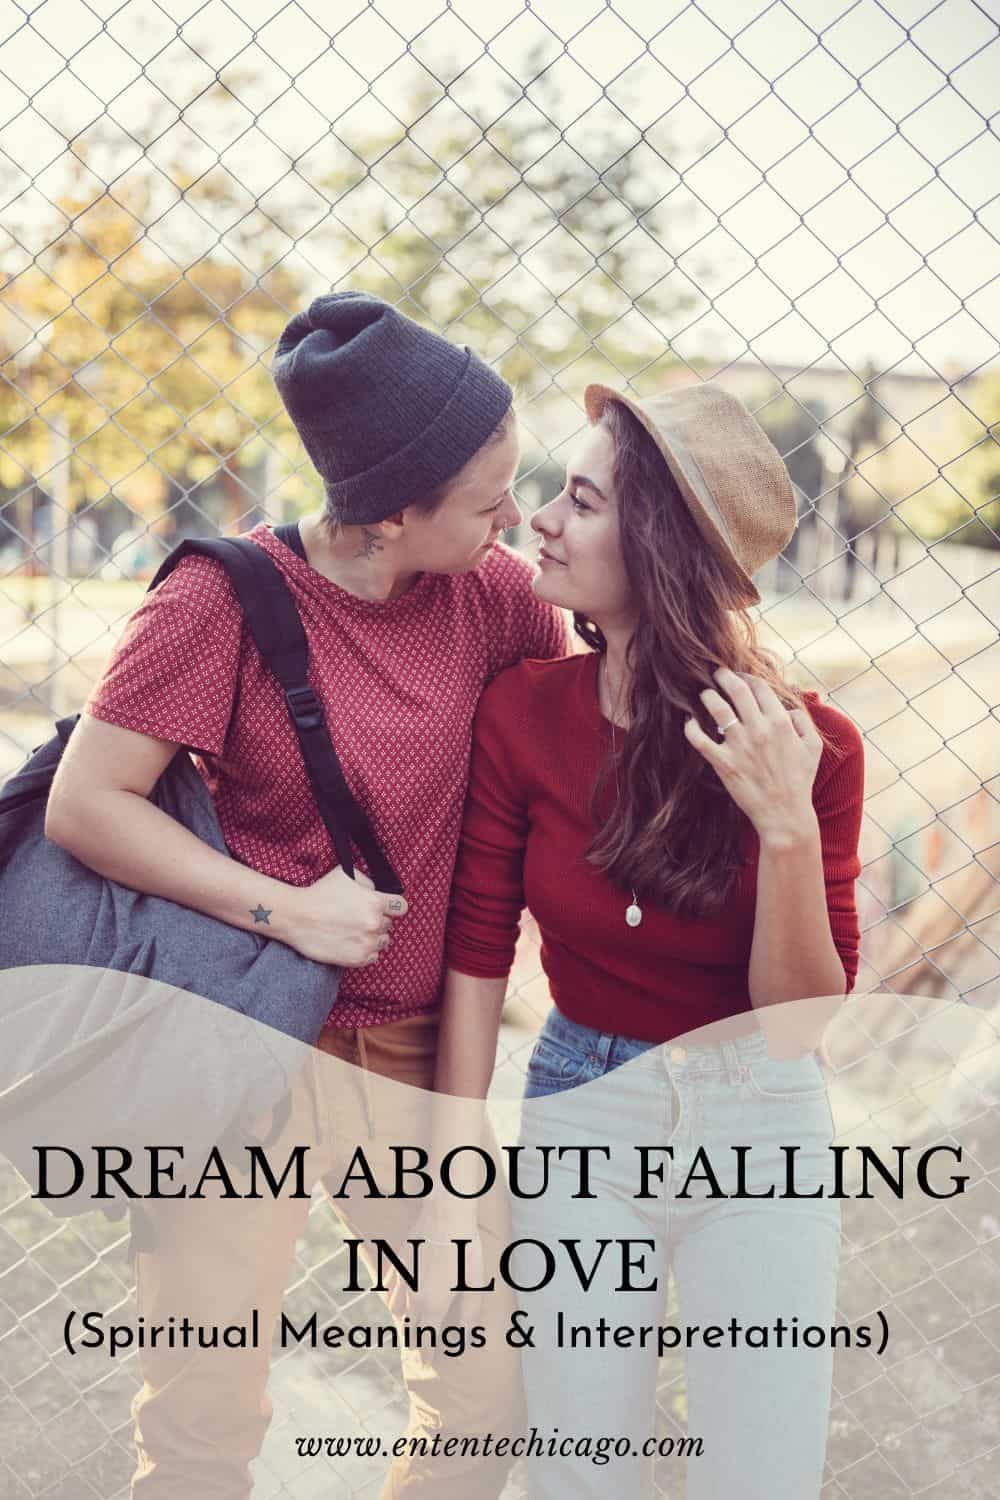 What Does It Mean When You Dream About Falling in Love